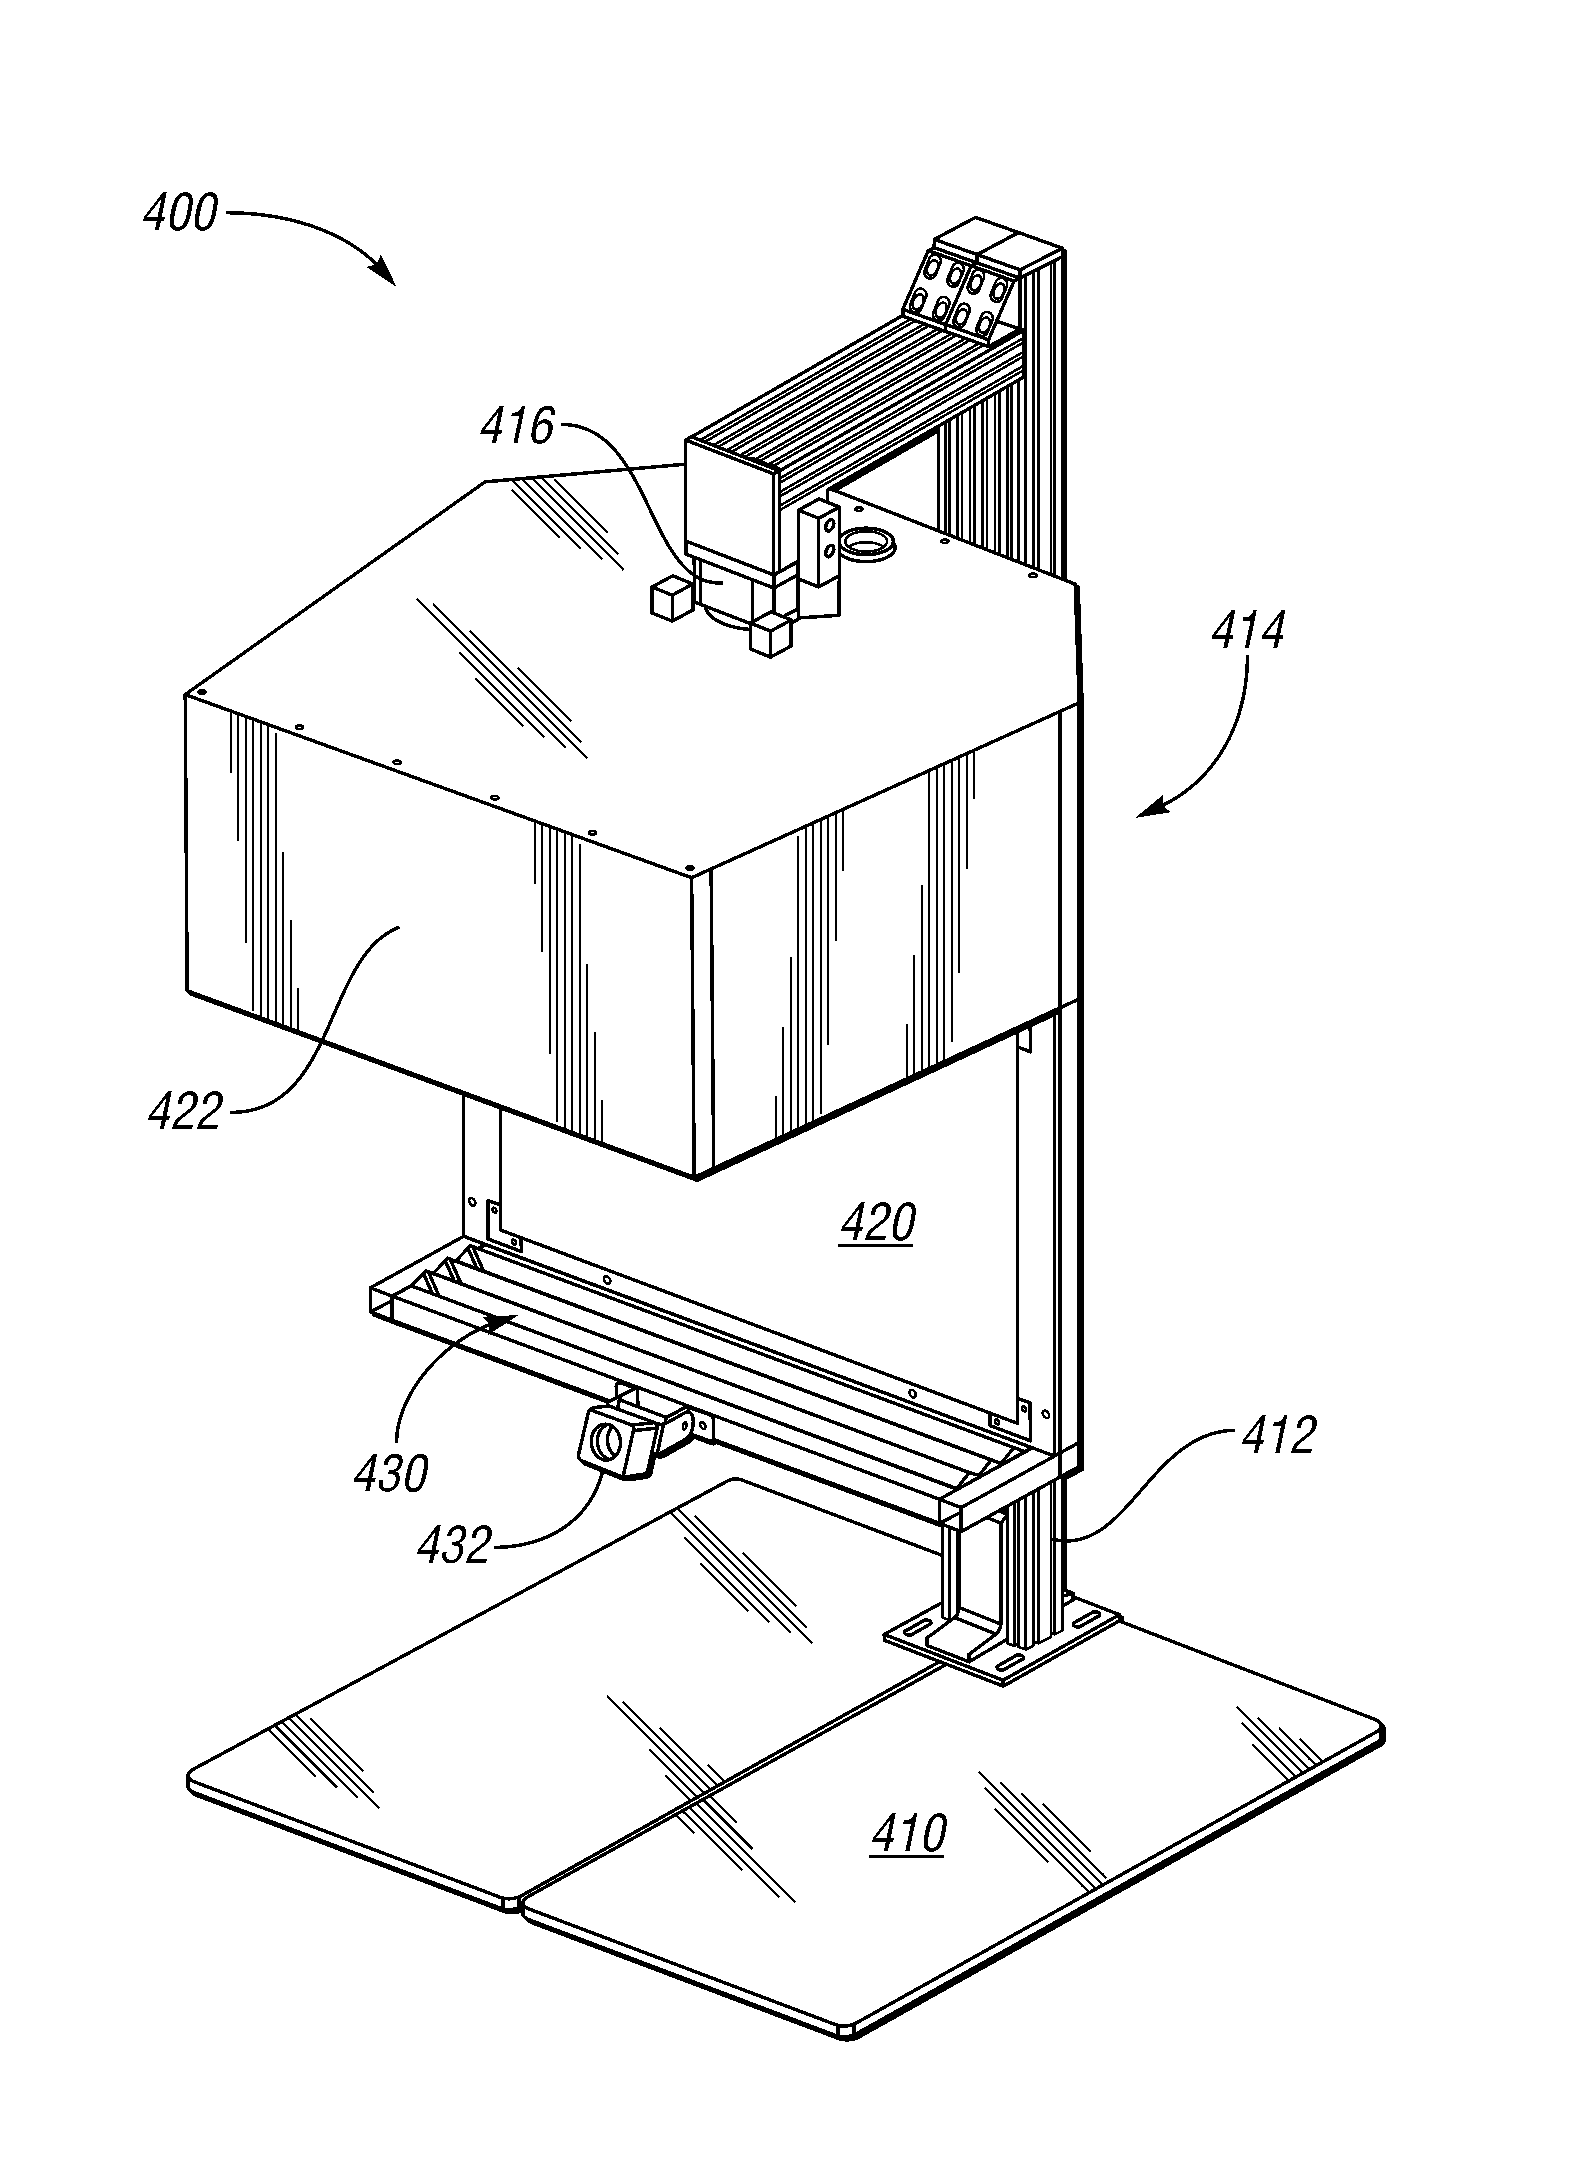 System and Method for Autostereoscopic Imaging